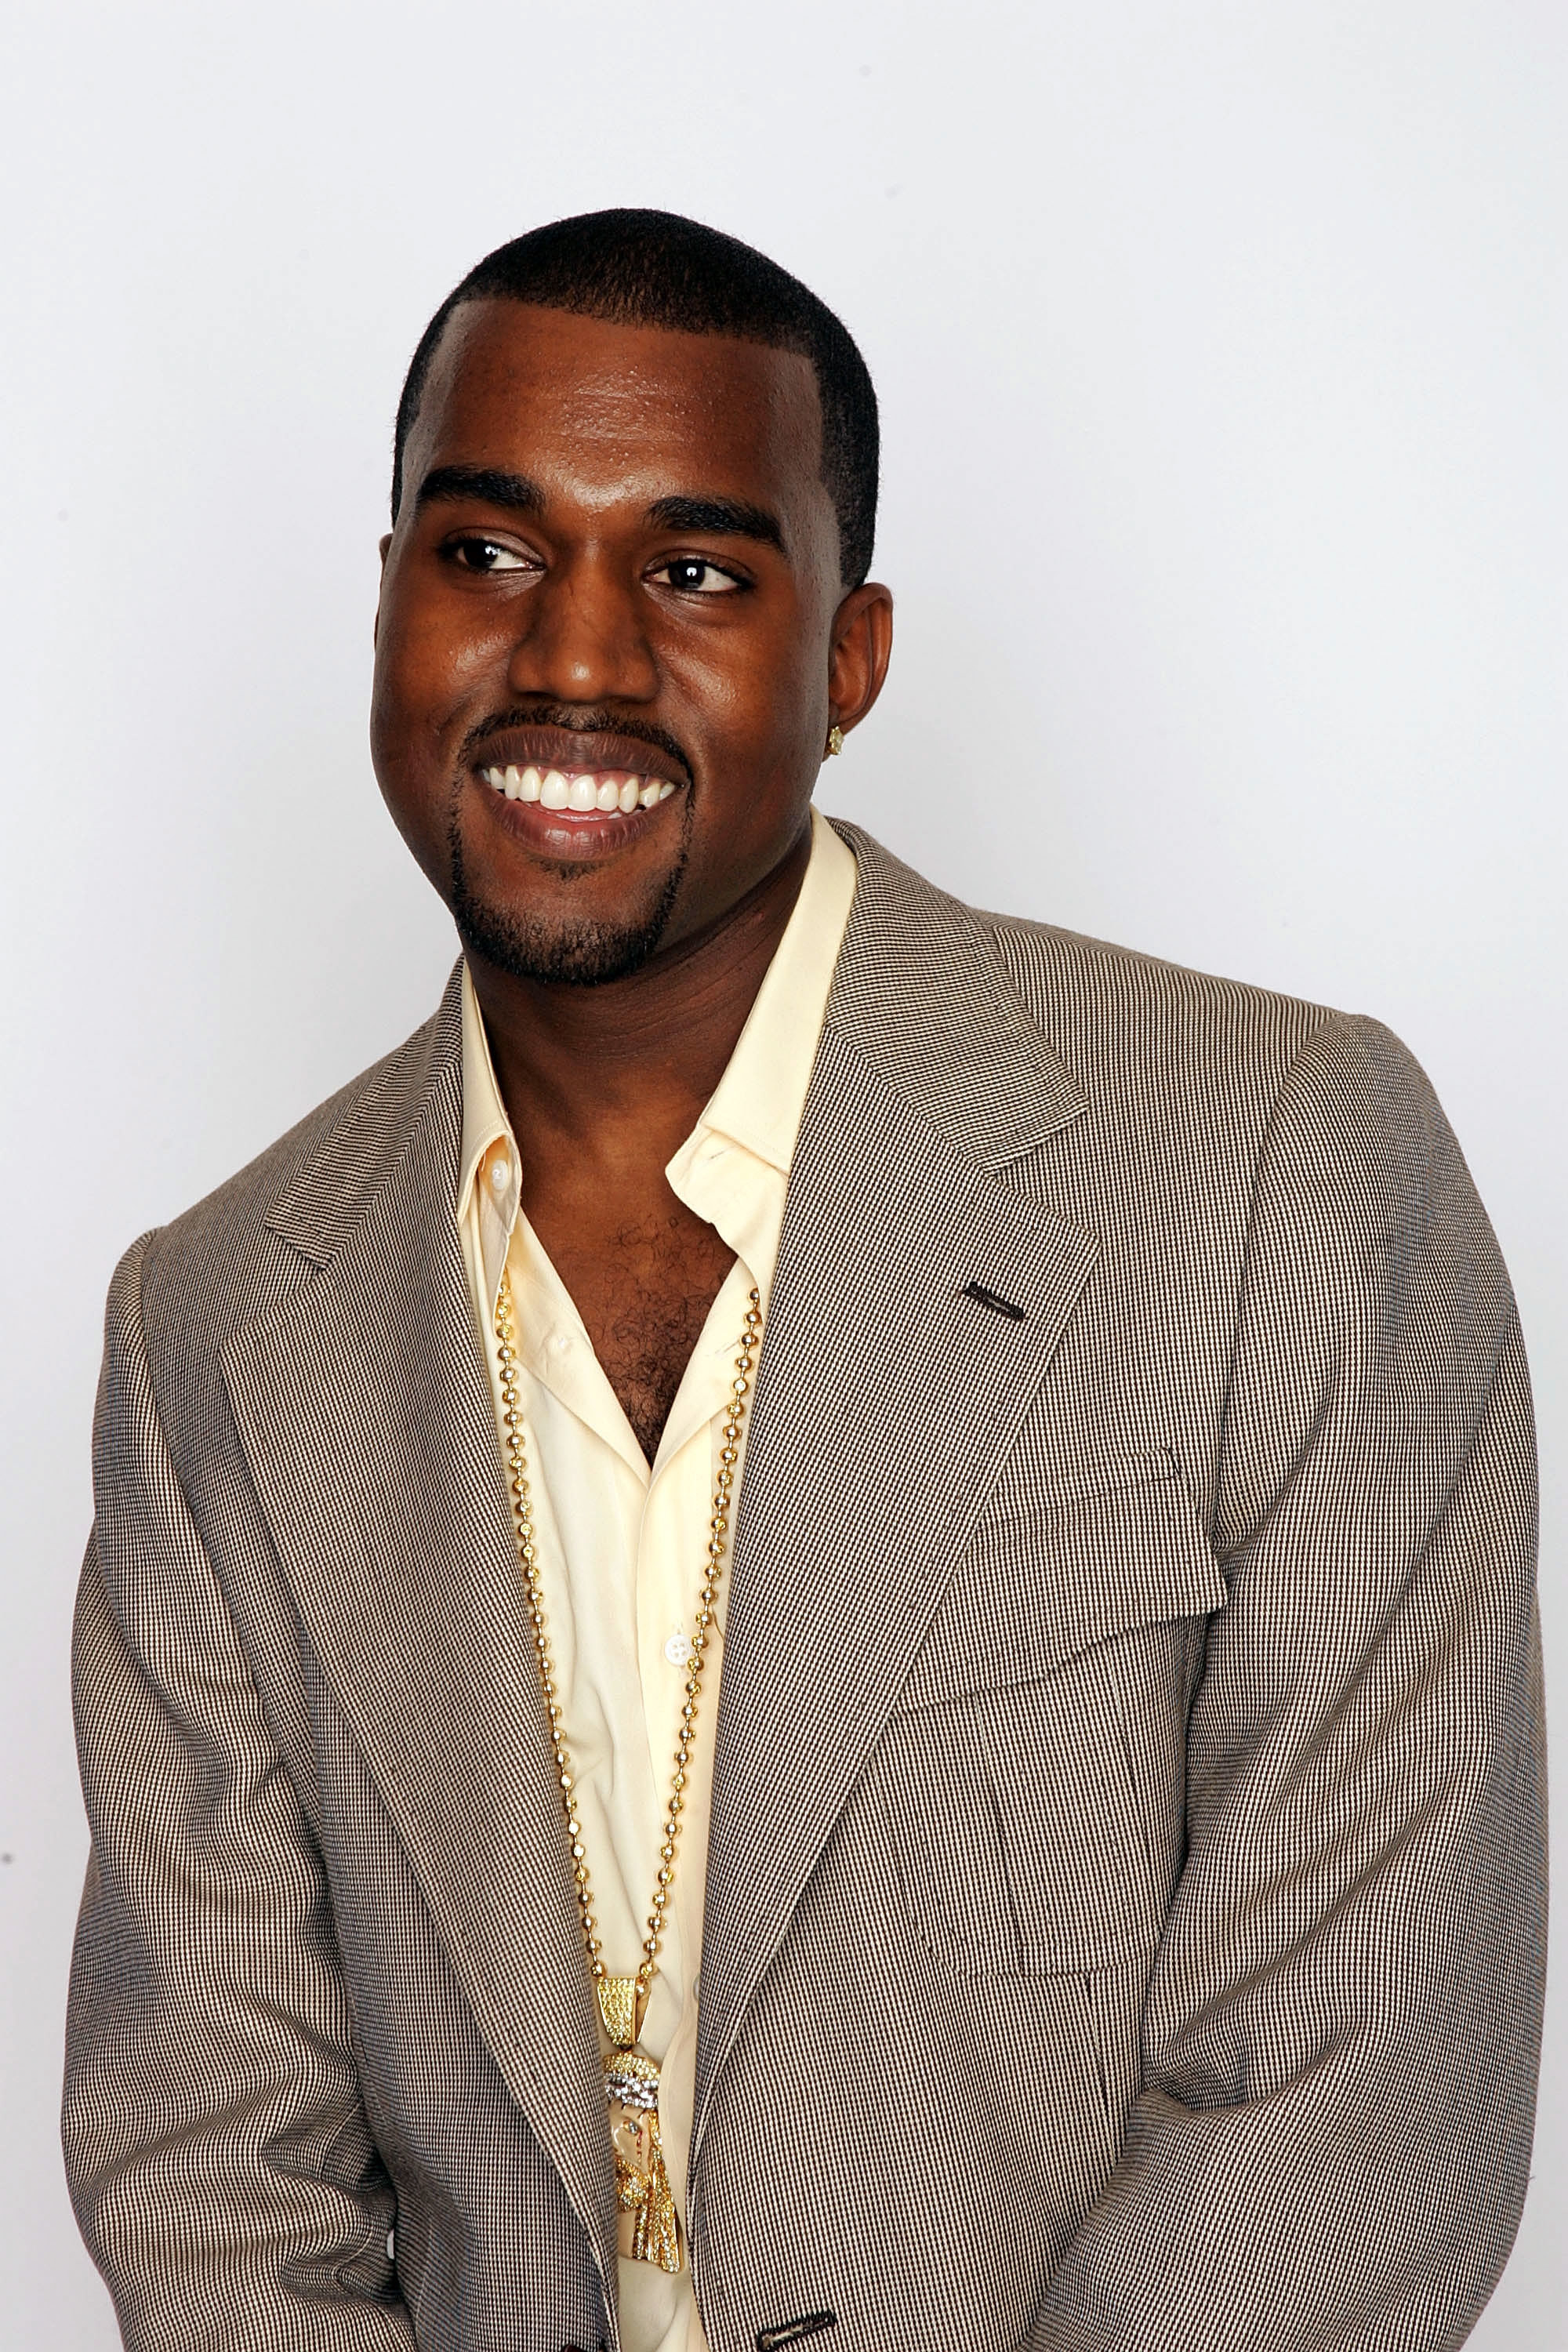 Kanye West poses for a picture backstage during the 2004 World Music Awards